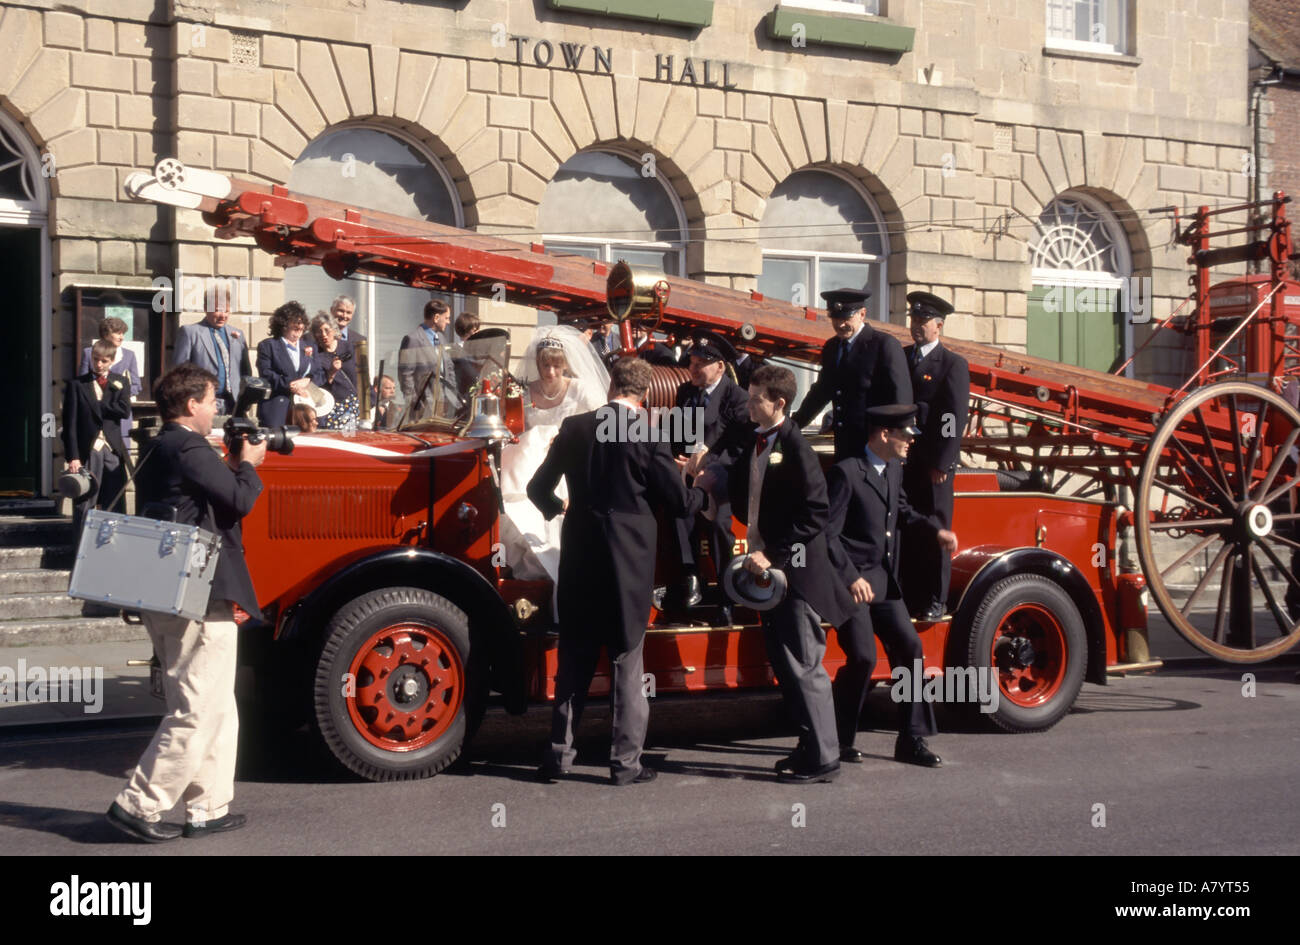 Glastonbury wedding guests on and around restored old fashioned fire engine parked outside town hall photographer attending Somerset England UK Stock Photo